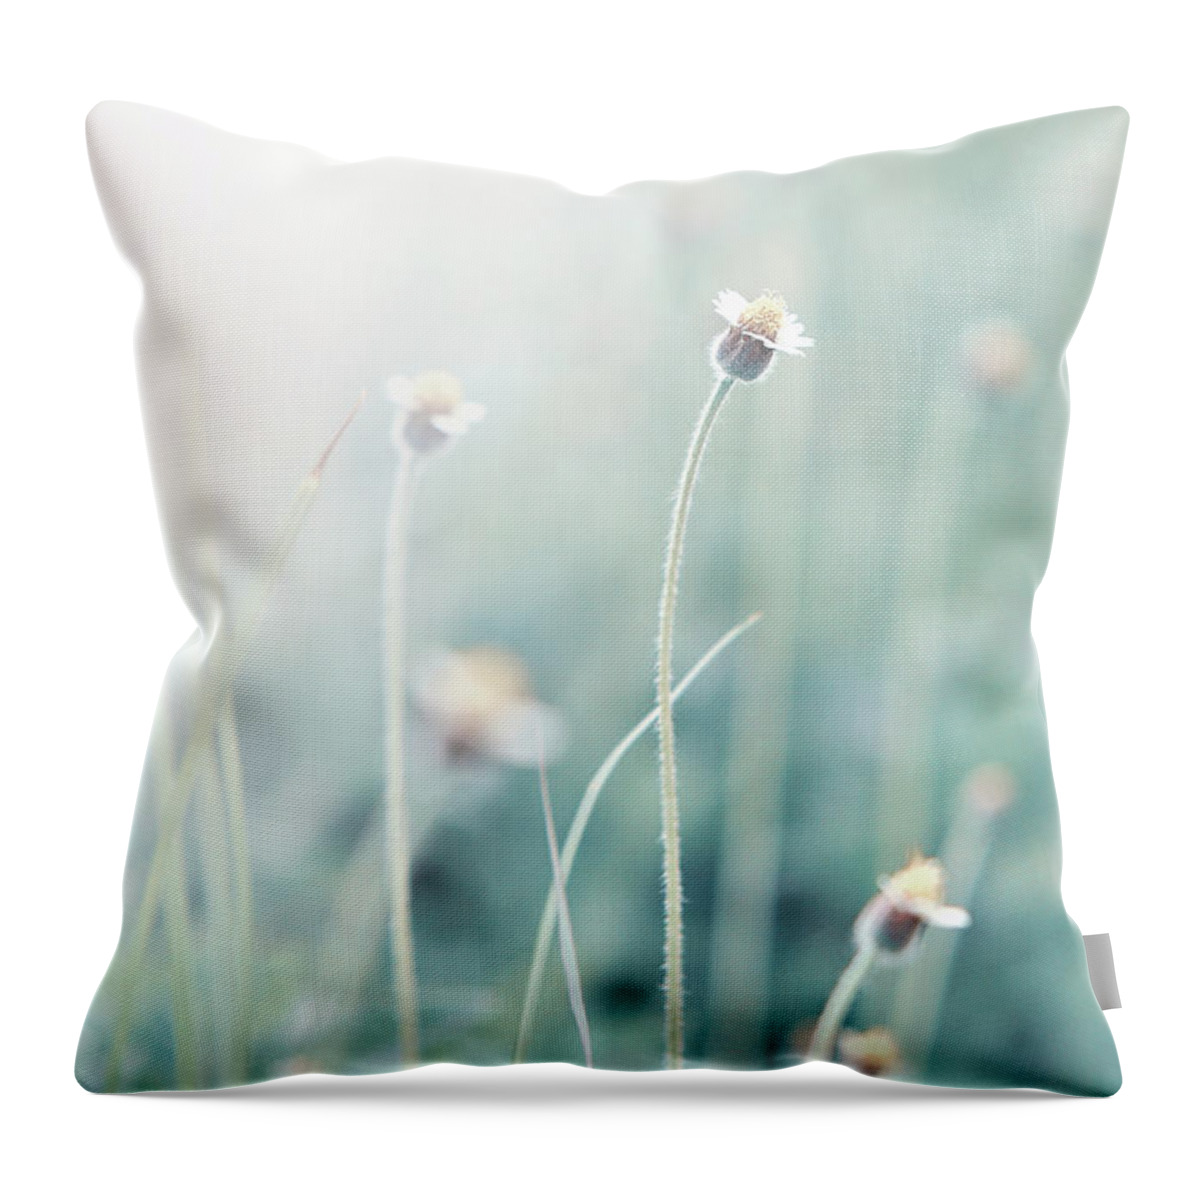 Outdoors Throw Pillow featuring the photograph Under Sun by Smerindo schultzpax